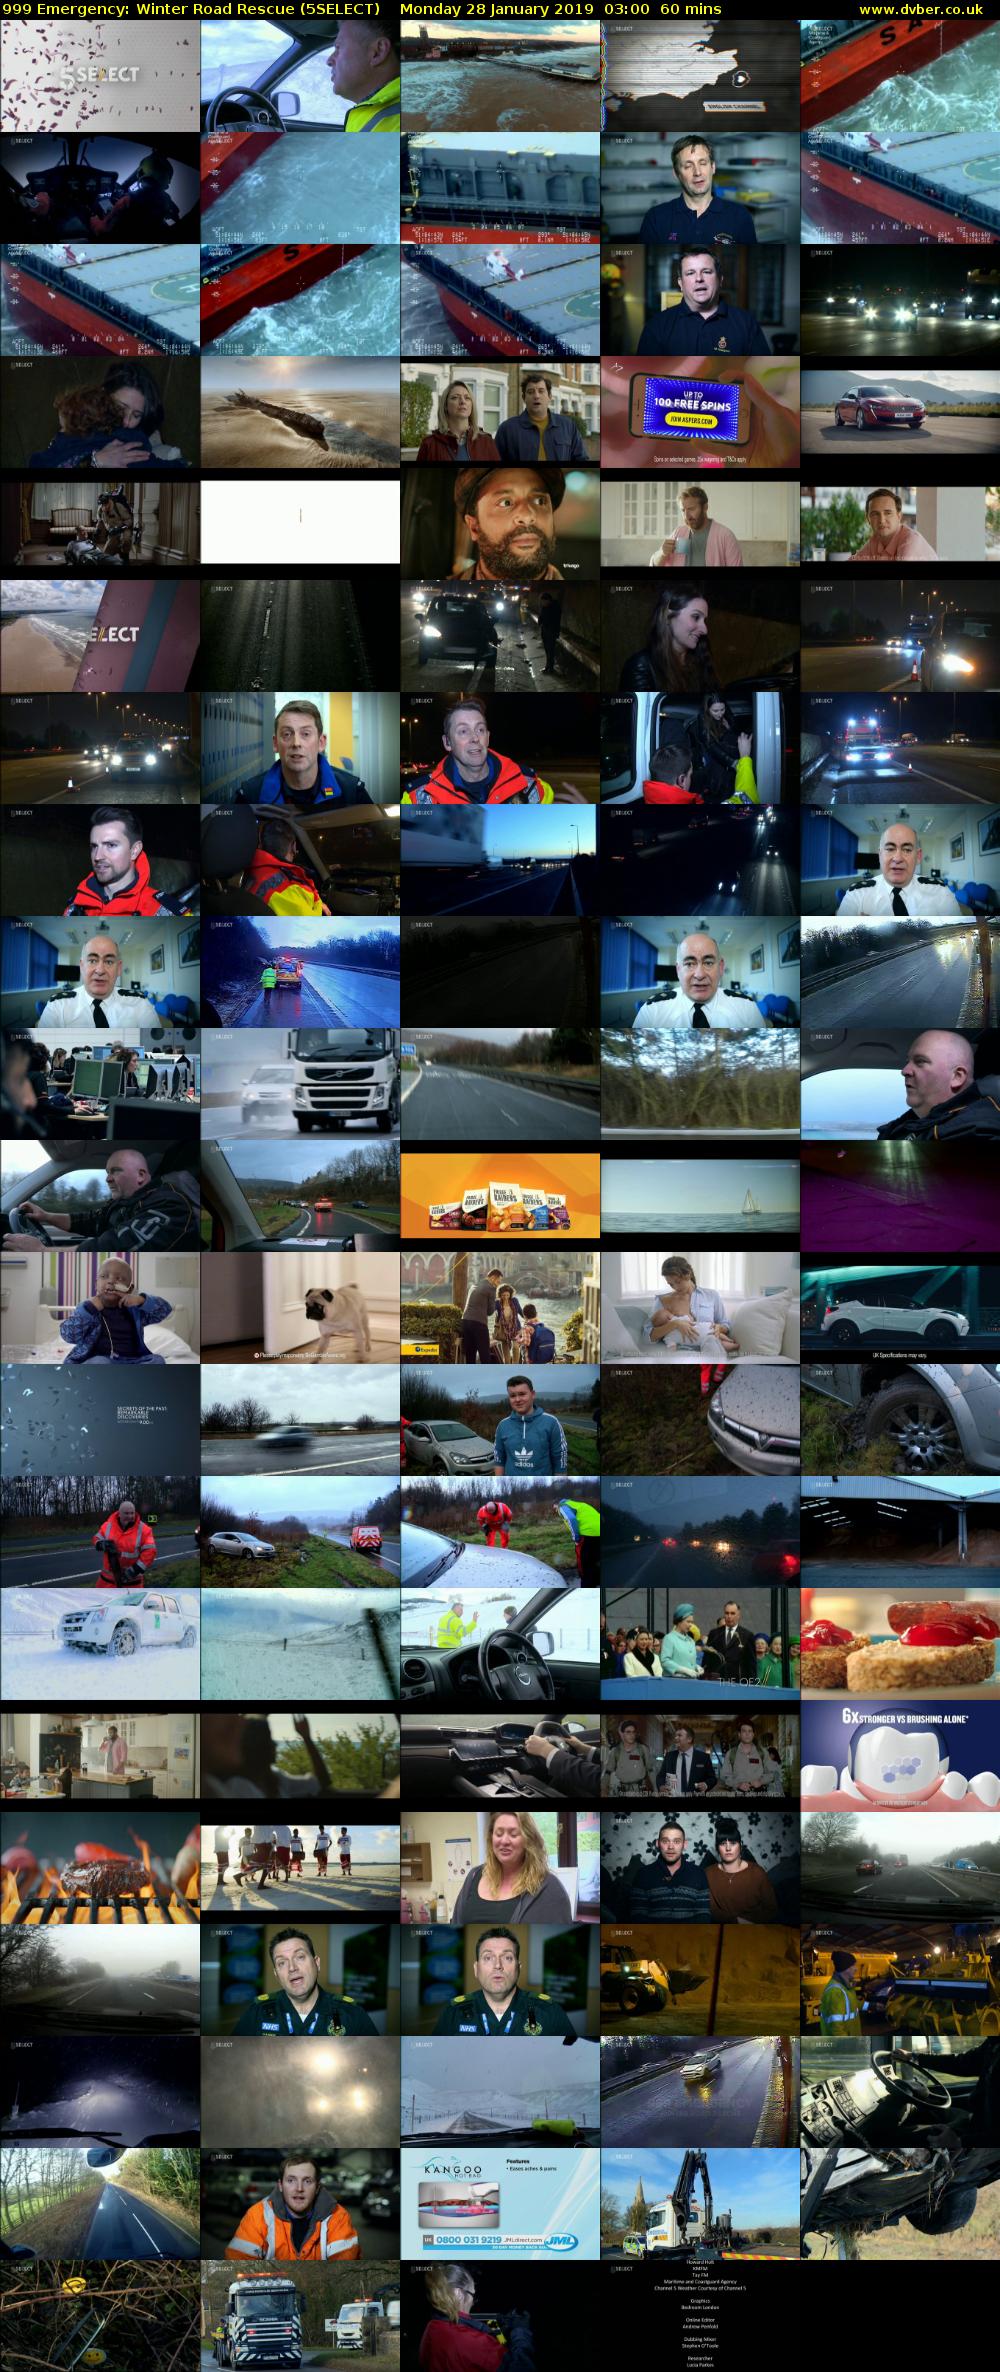 999 Emergency: Winter Road Rescue (5SELECT) Monday 28 January 2019 03:00 - 04:00